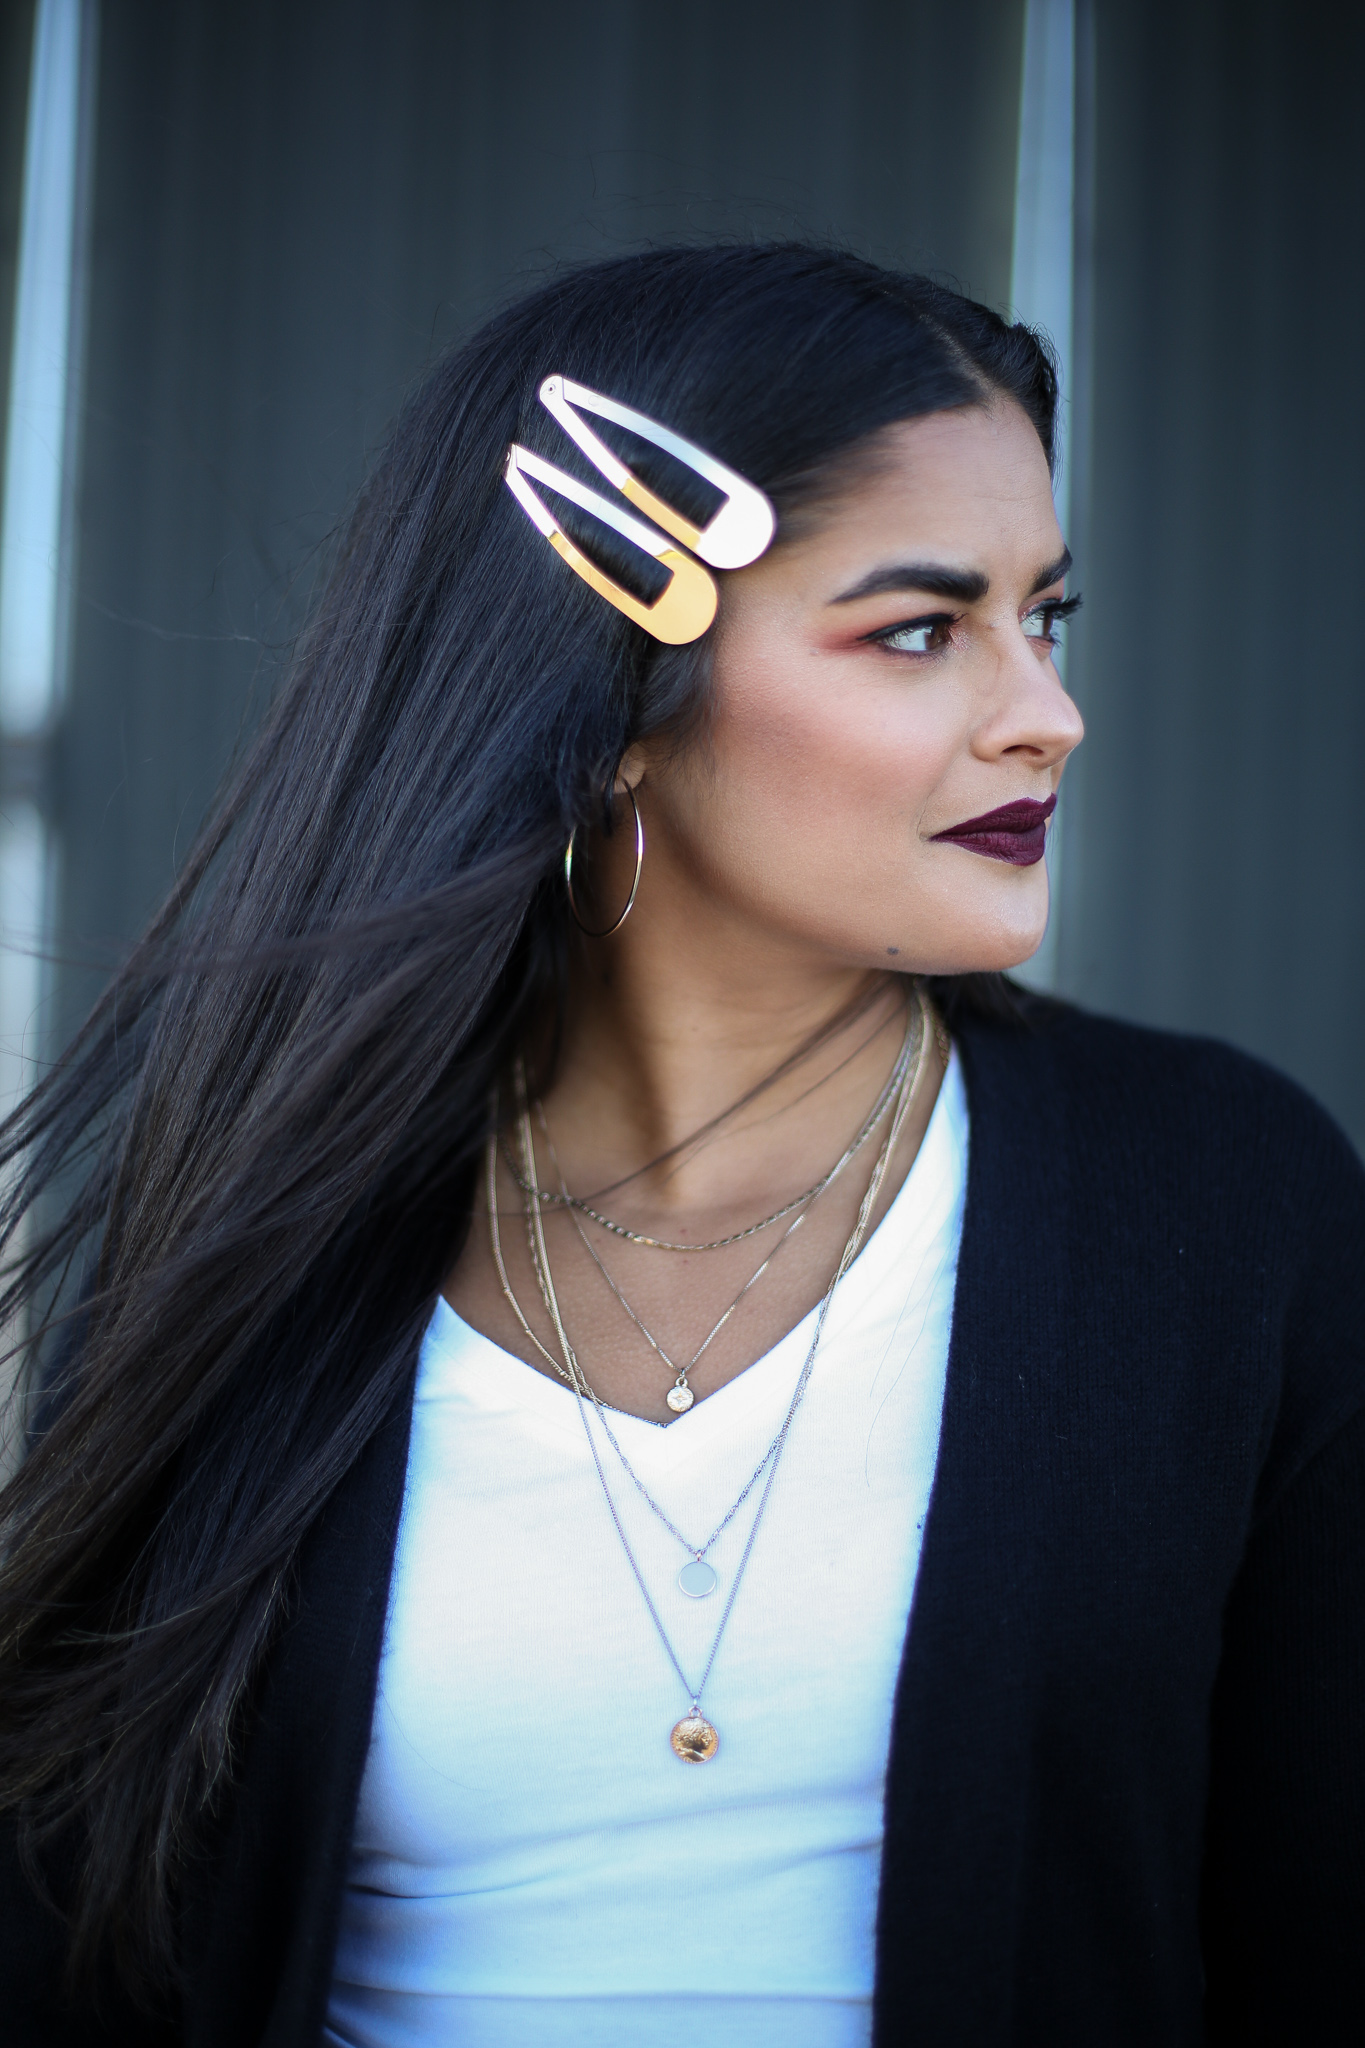 Priya the Blog, Nashville fashion blog, Nashville fashion blogger, Nashville style blog, Nashville style blogger, Nashville lifestyle blog, 2021 Goals, white combat boots, girlfriend jeans, white crop tee, long black cardigan, how to style white combat boots,